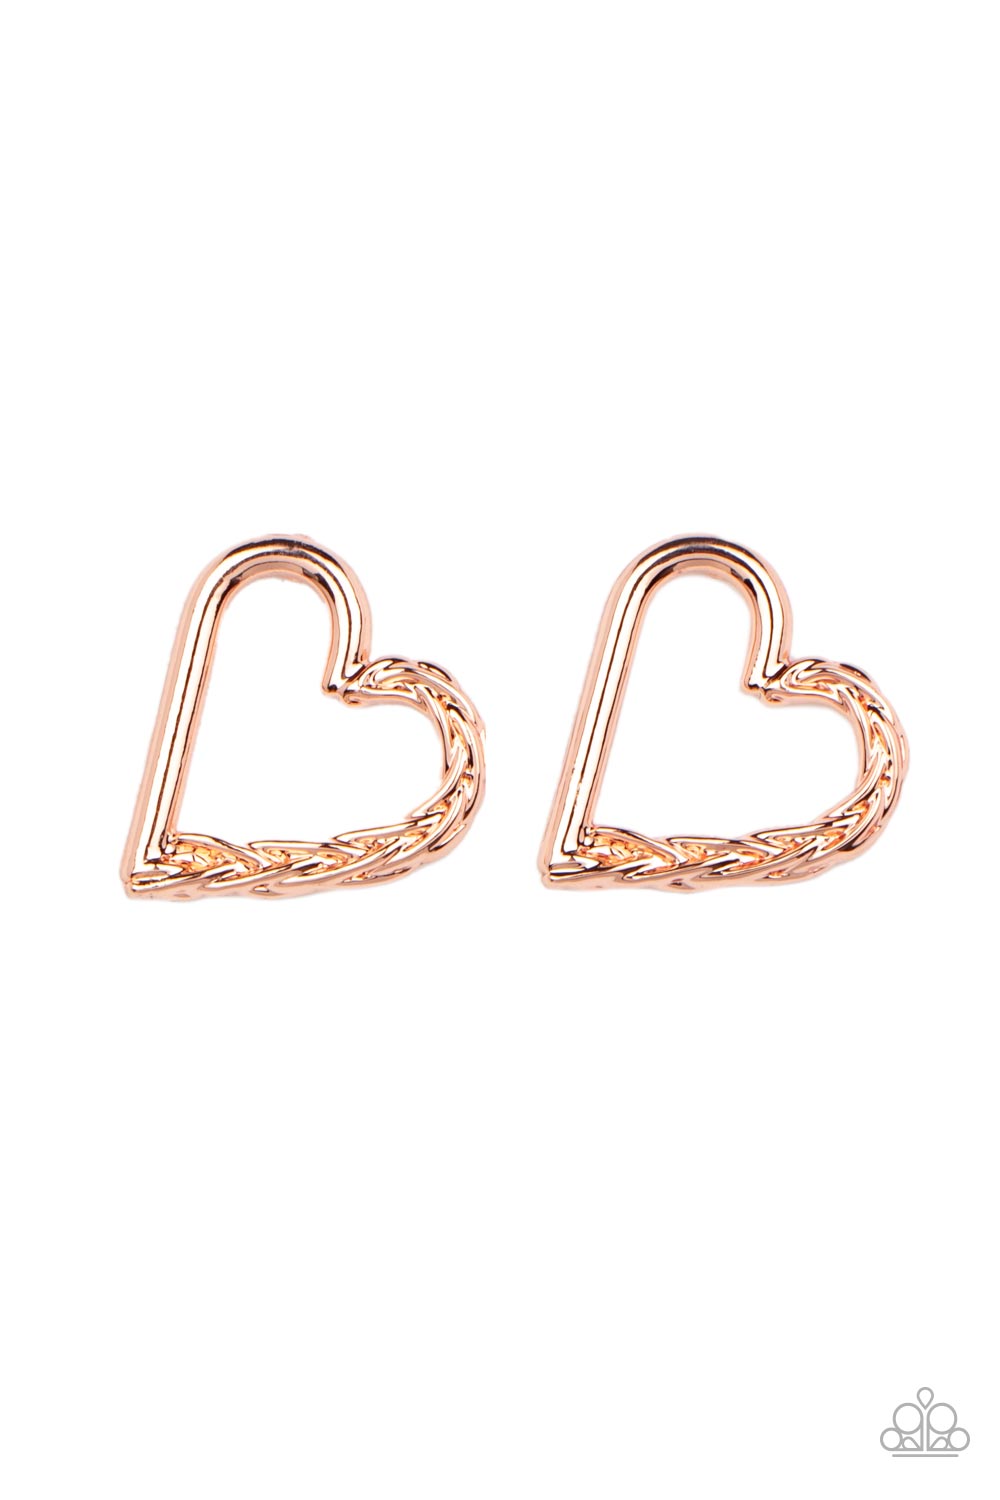 Cupid, Who? - Copper - The V Resale Boutique